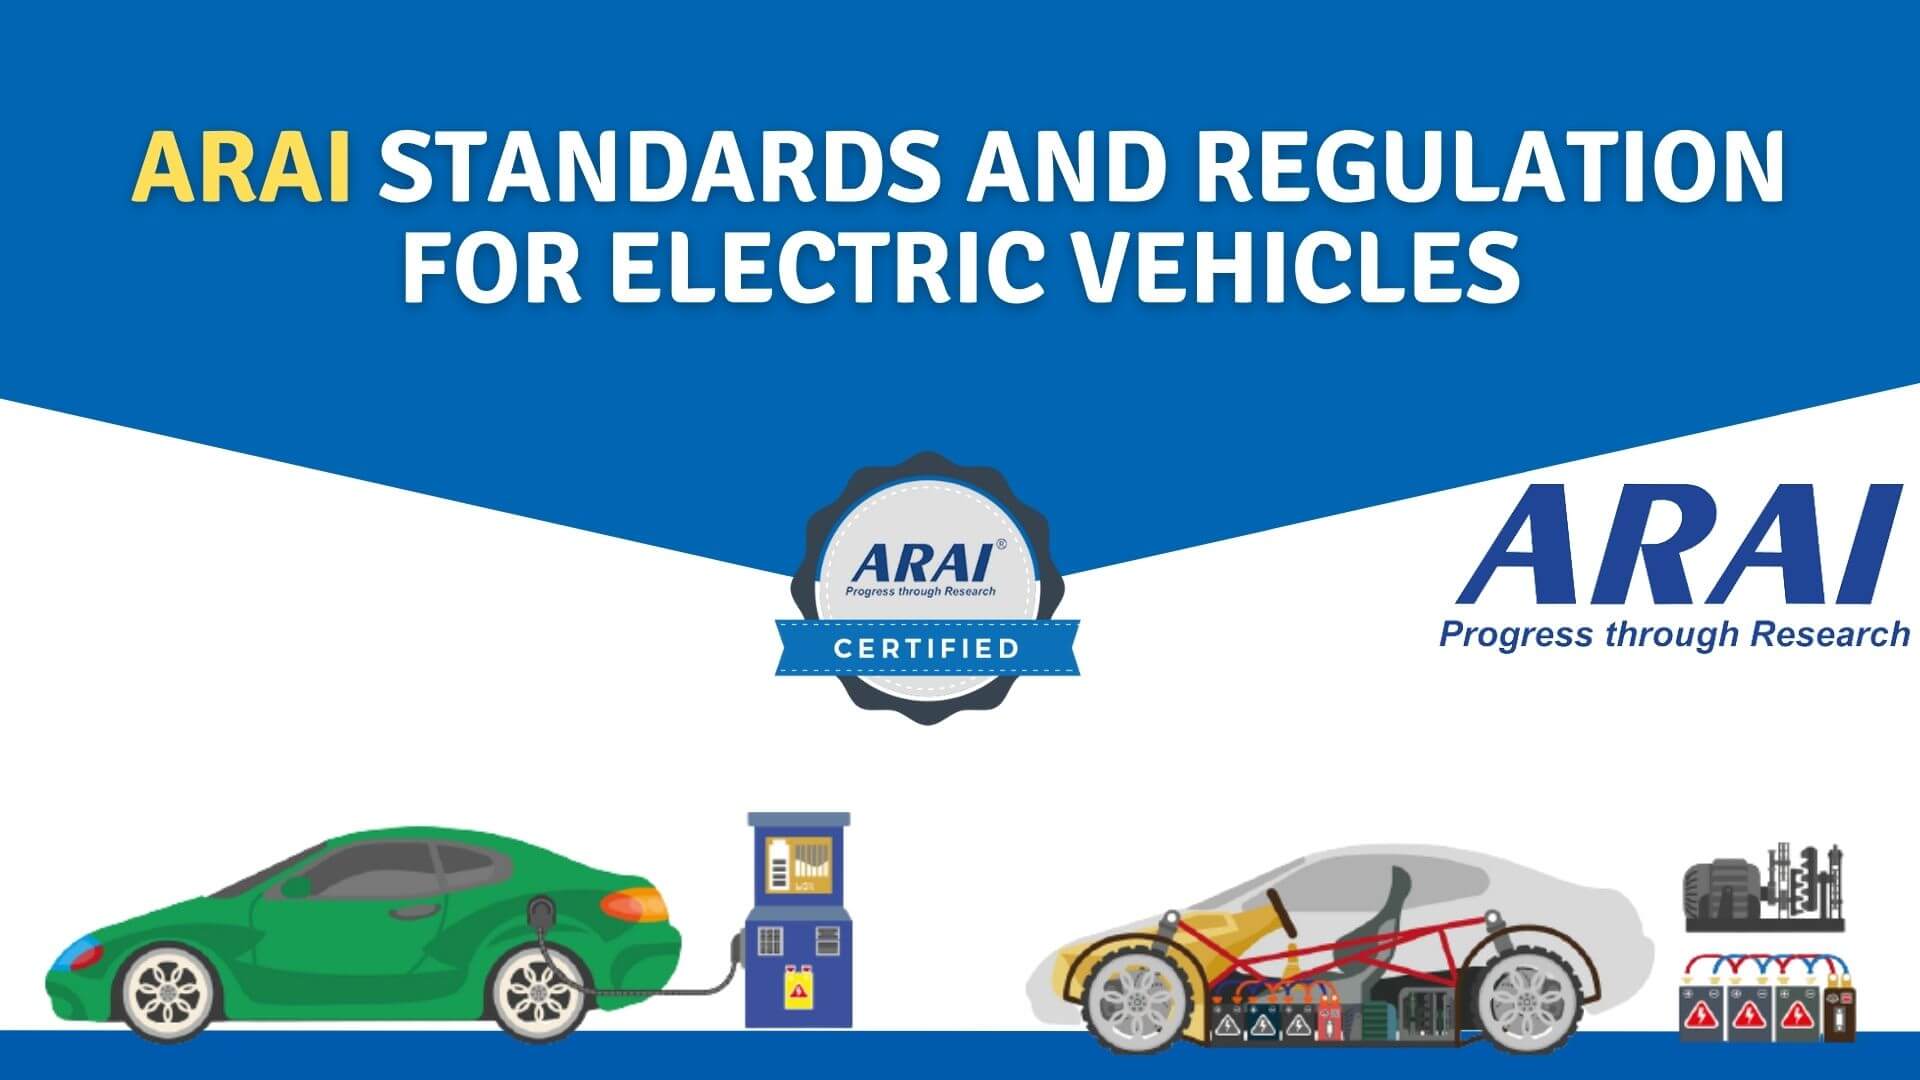 https://e-vehicleinfo.com/electric-vehicles-in-india-arai-standards-and-regulation/